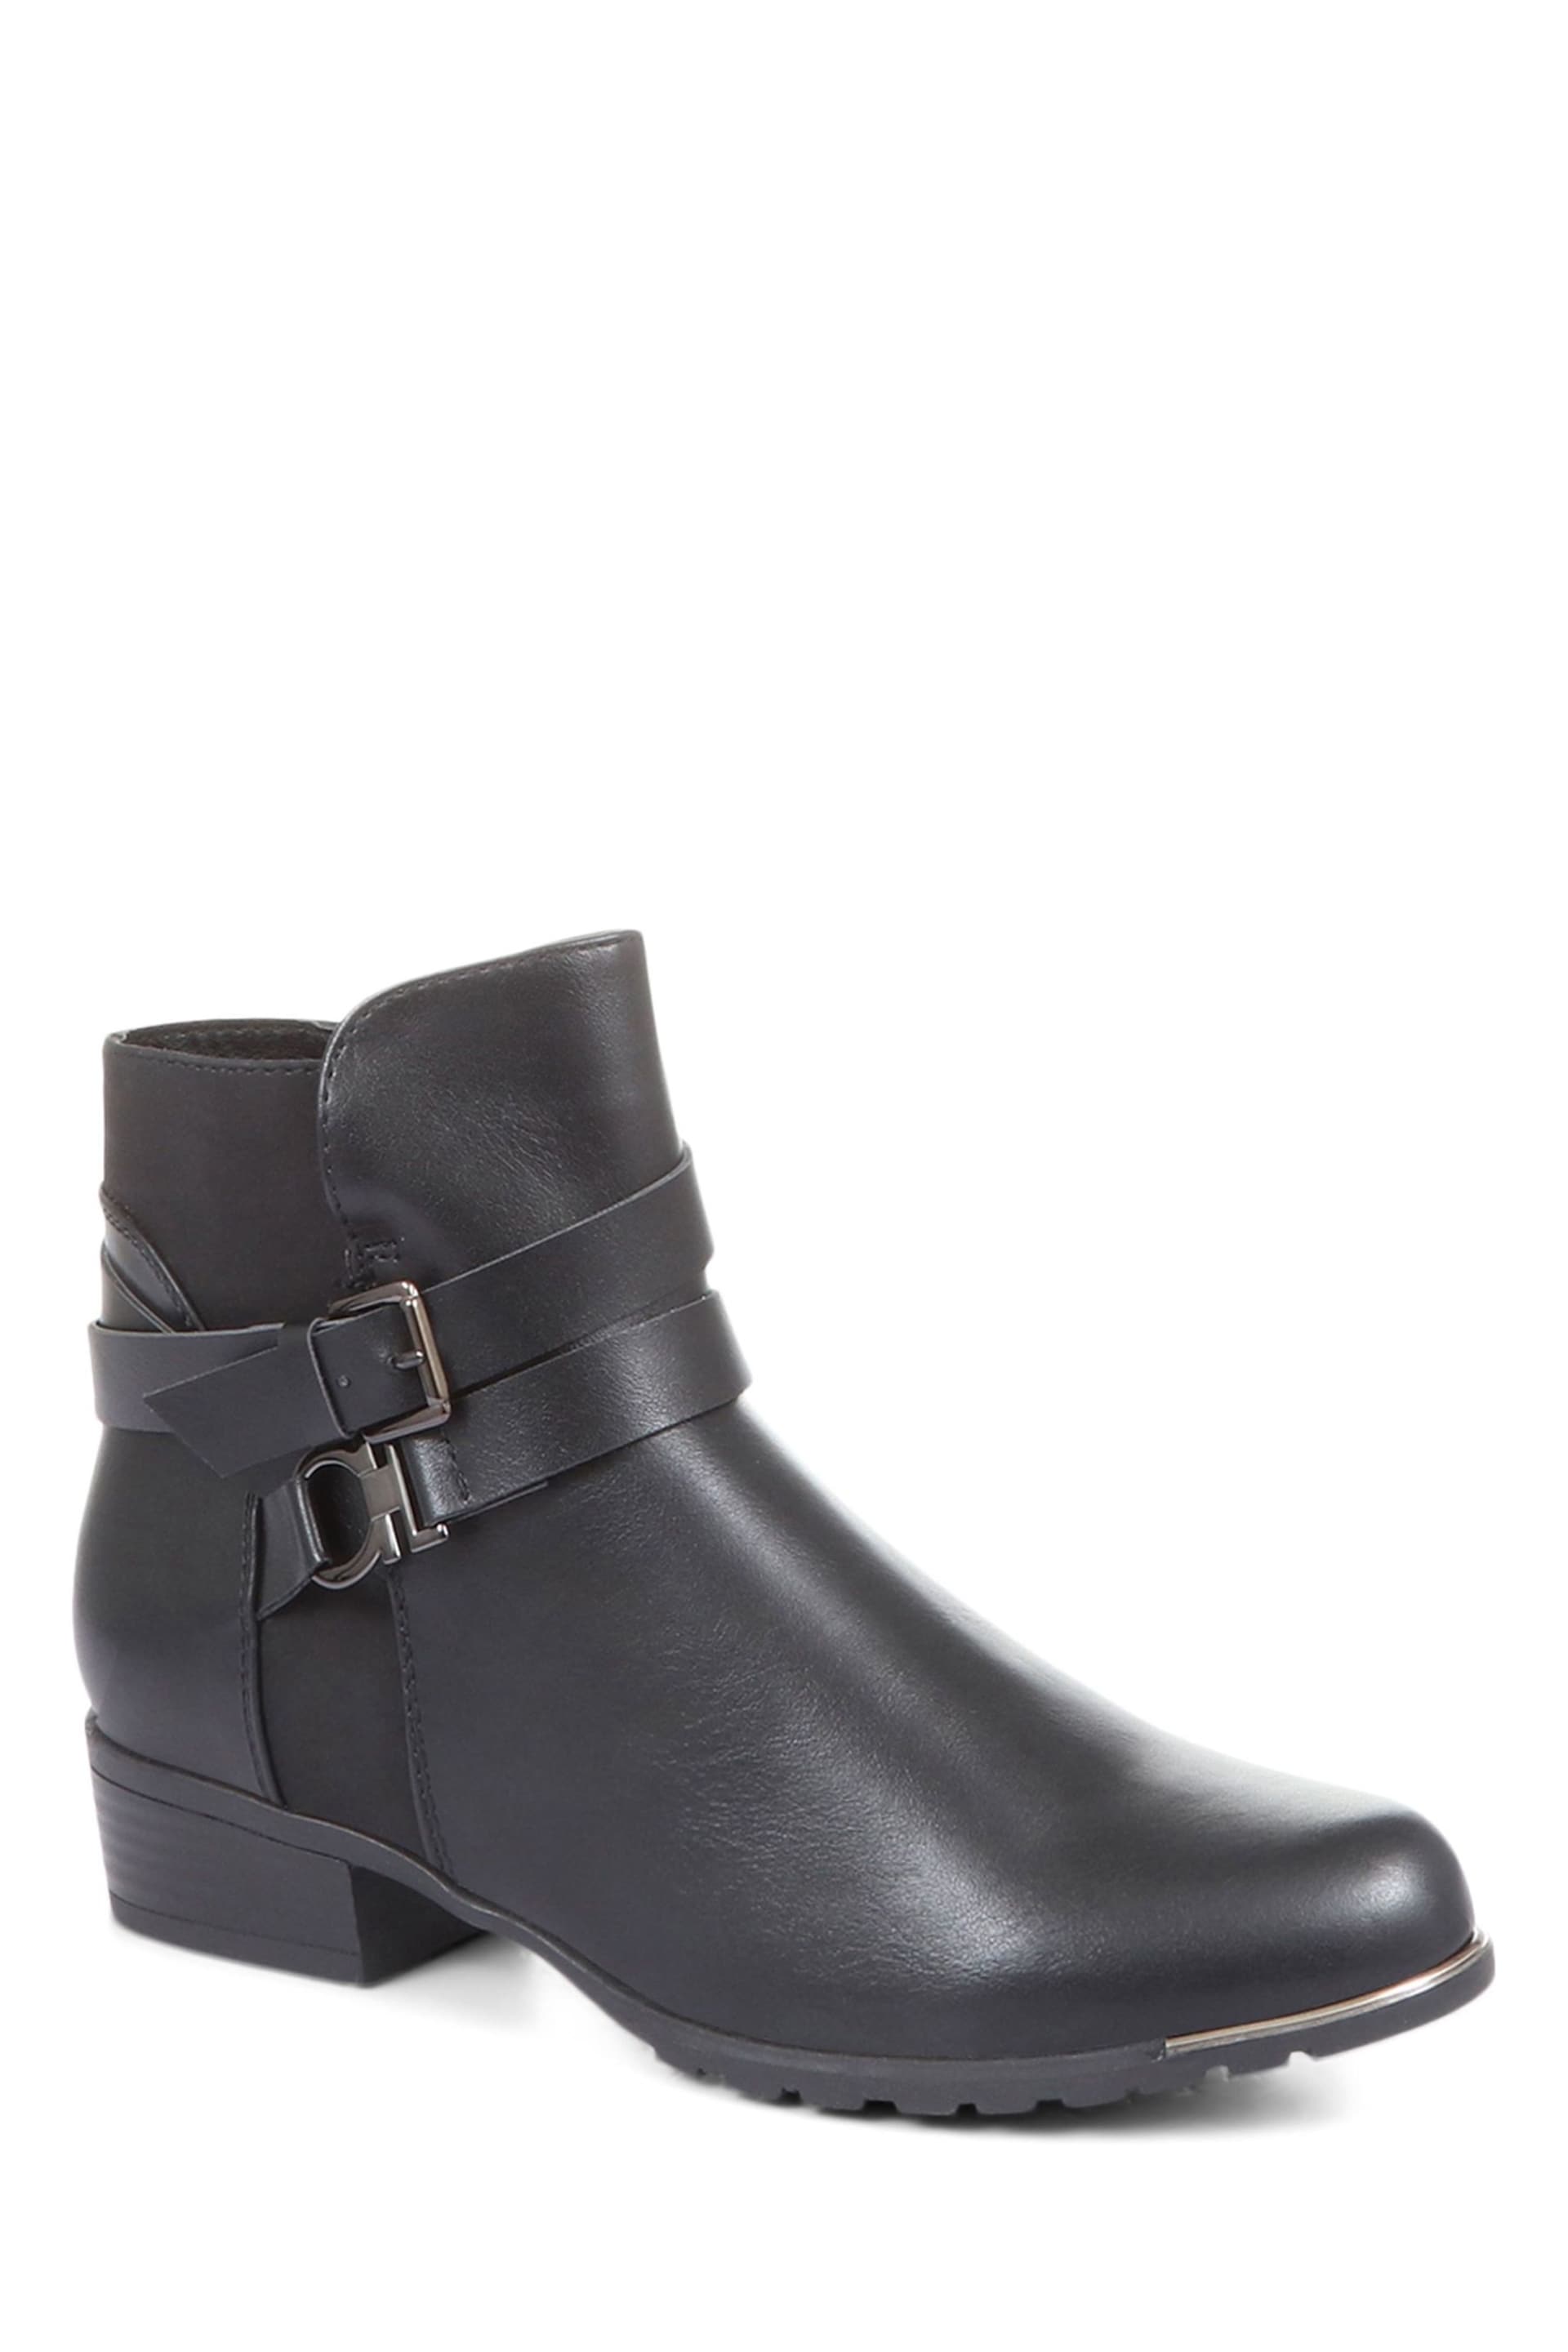 Pavers Ladies	Flat Ankle Boots - Image 4 of 5